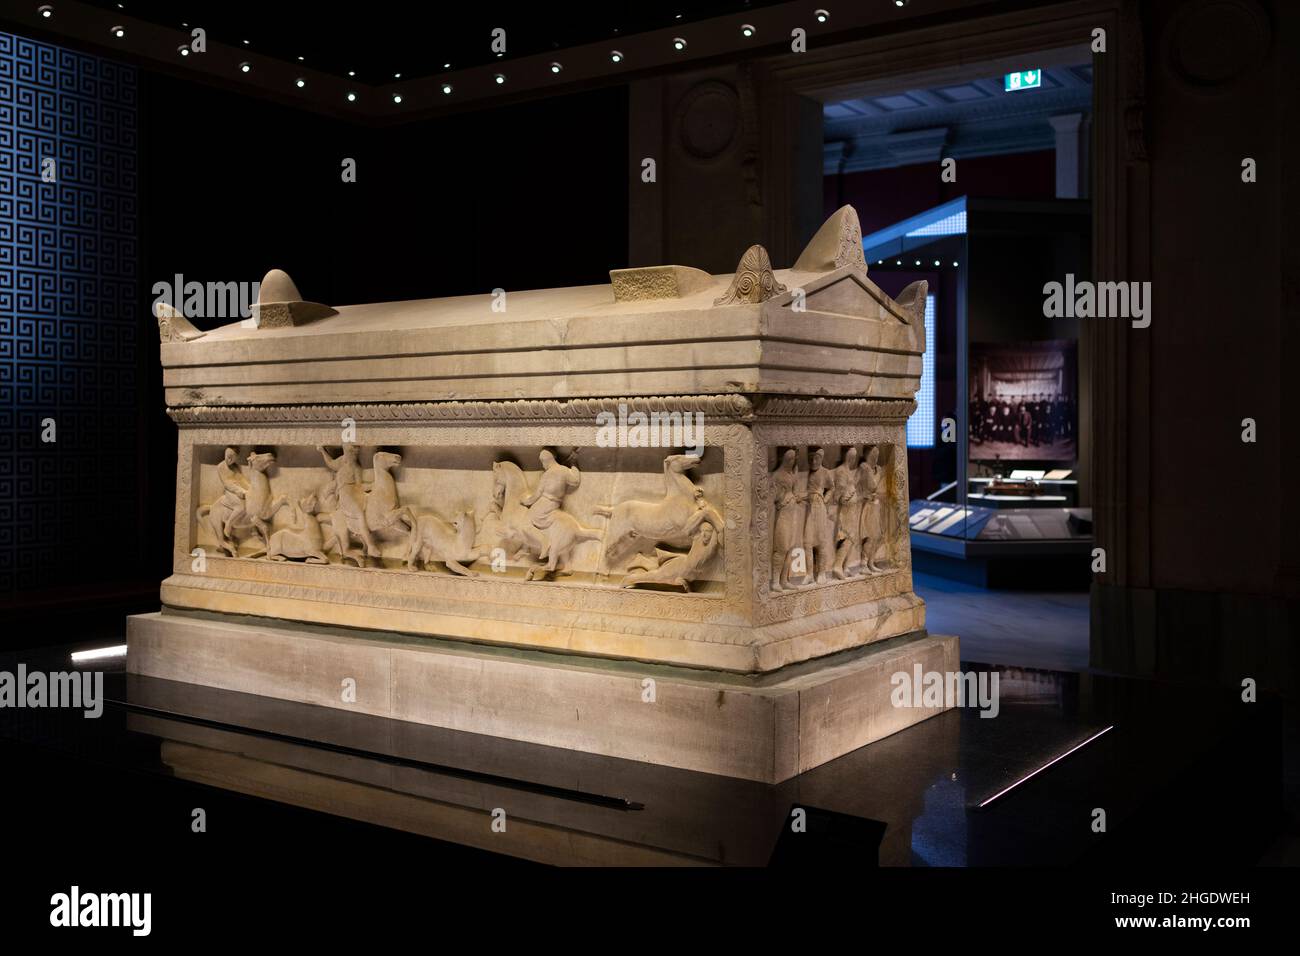 Satrap Sarcophagus in Istanbul Archaeology Museum, Turkey. Stock Photo